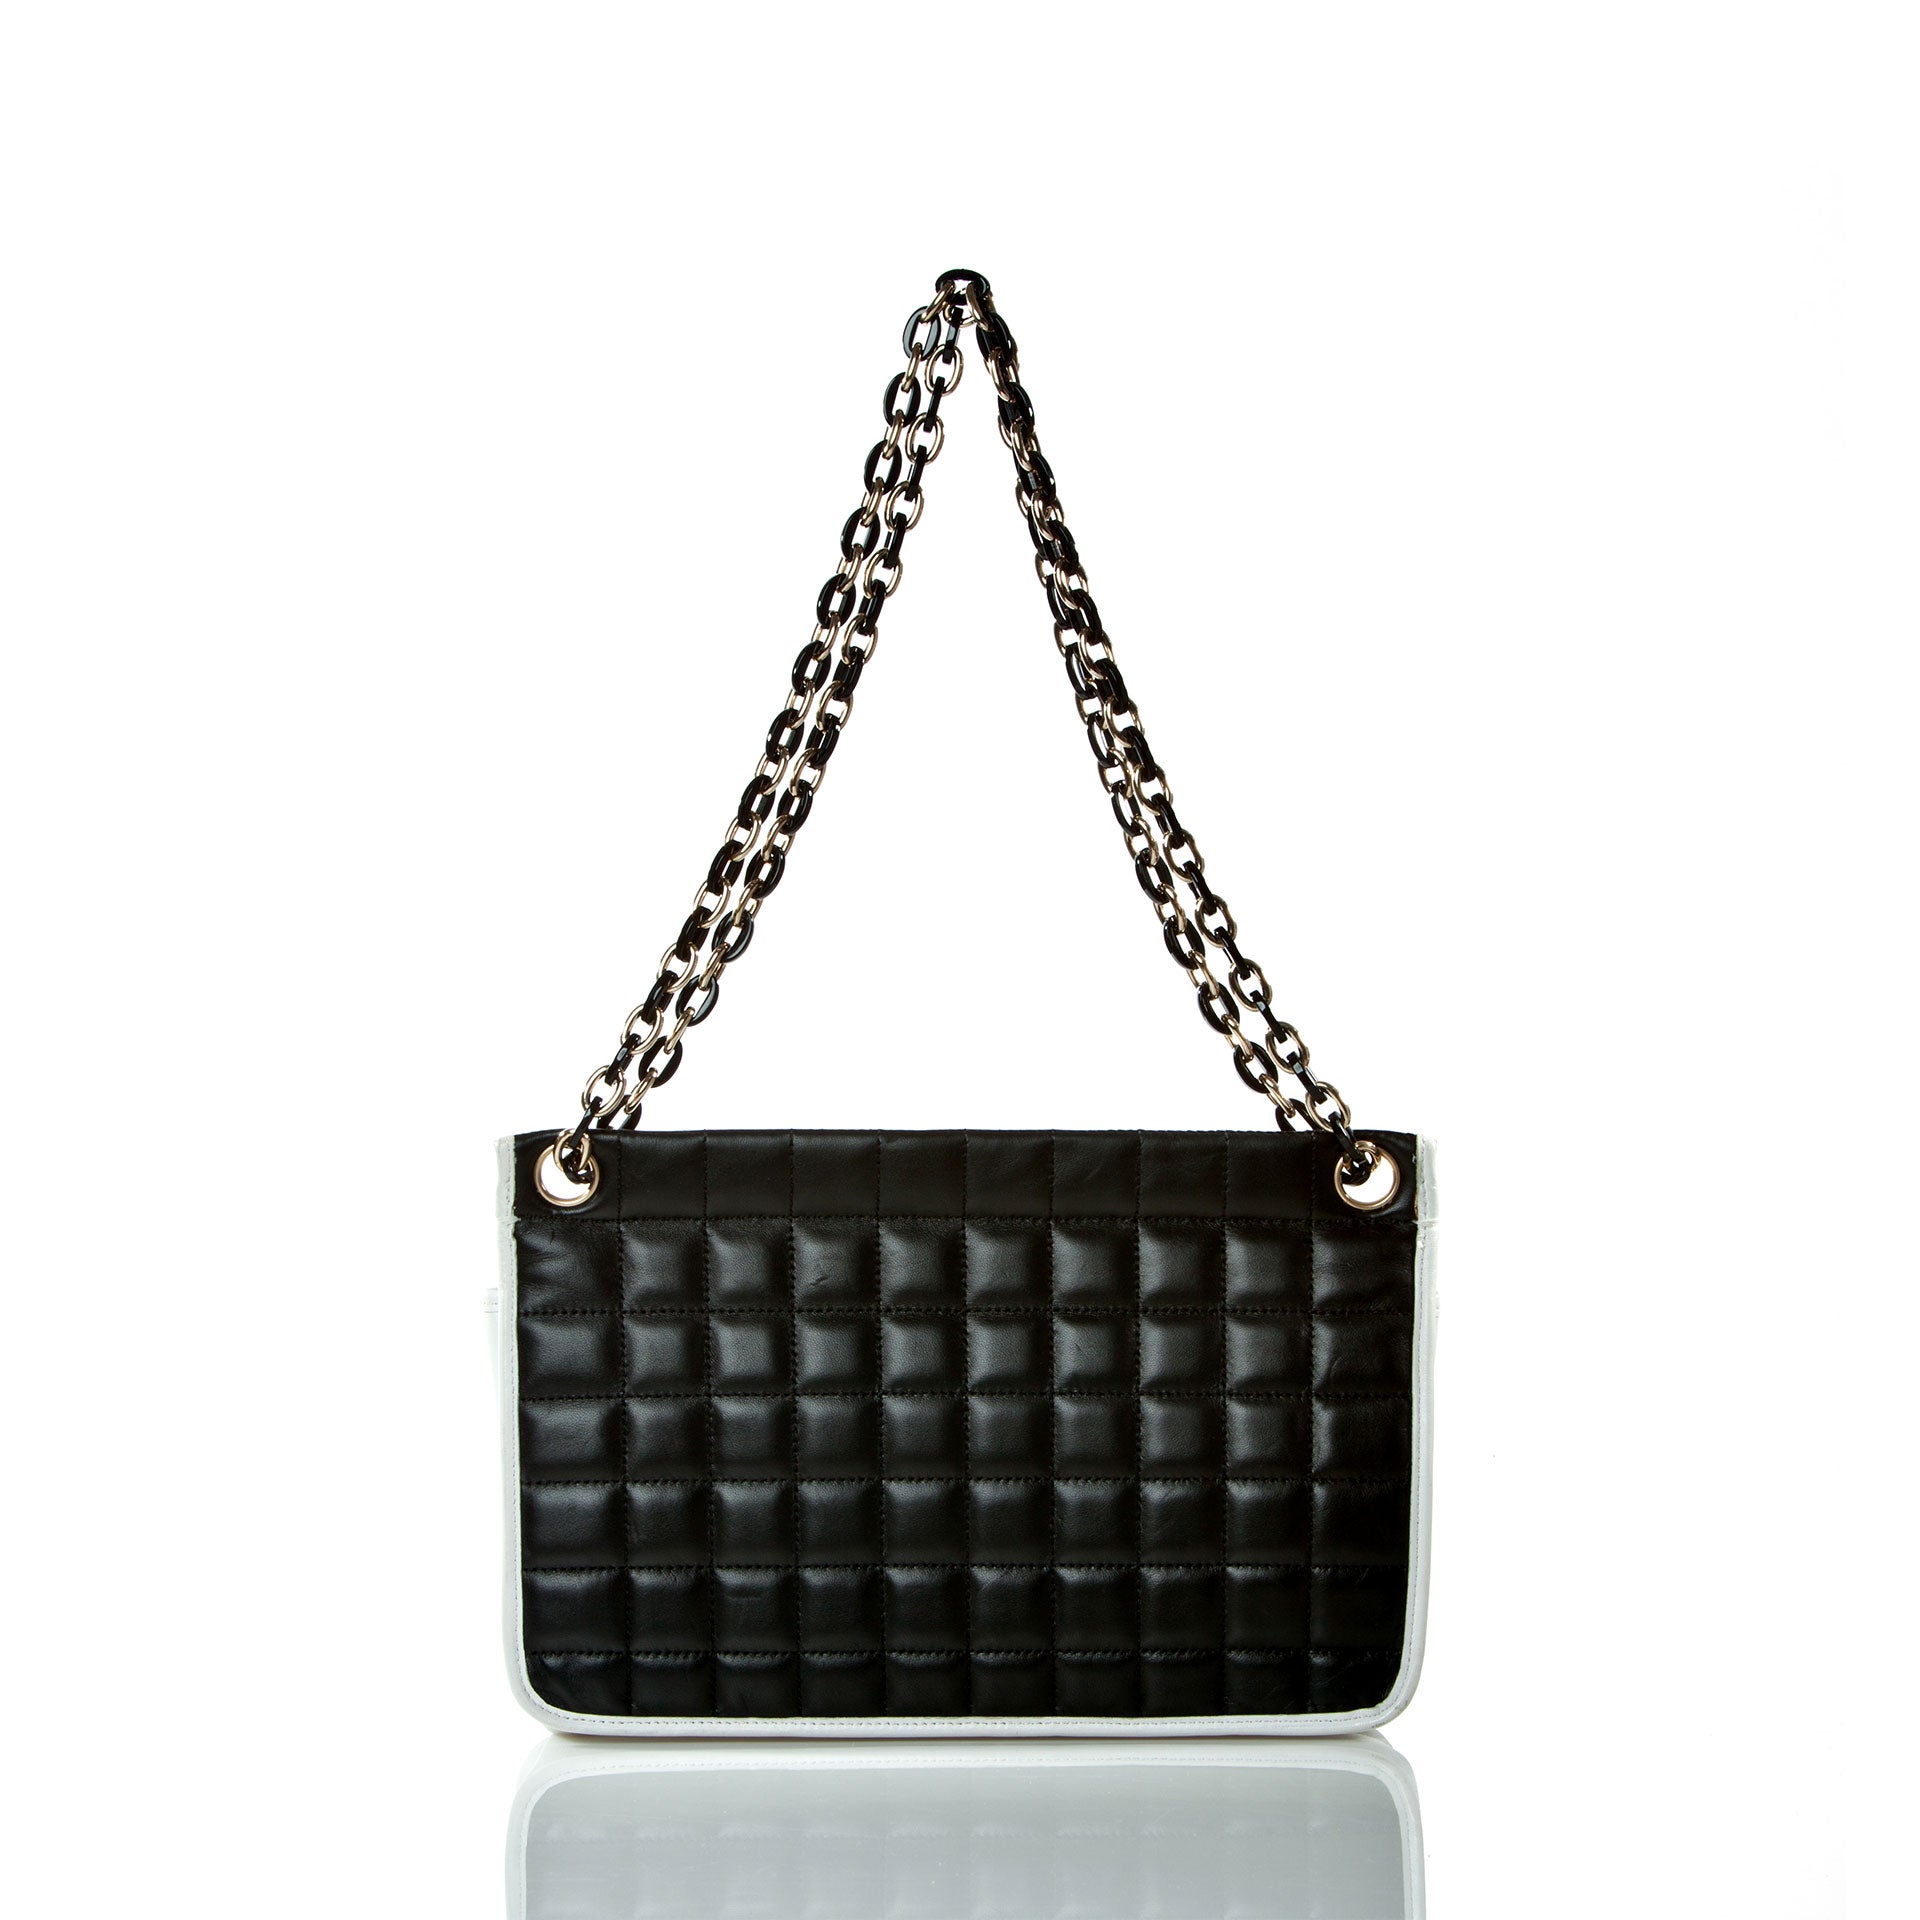 Chanel Mademoiselle Two Tone Flap Bag